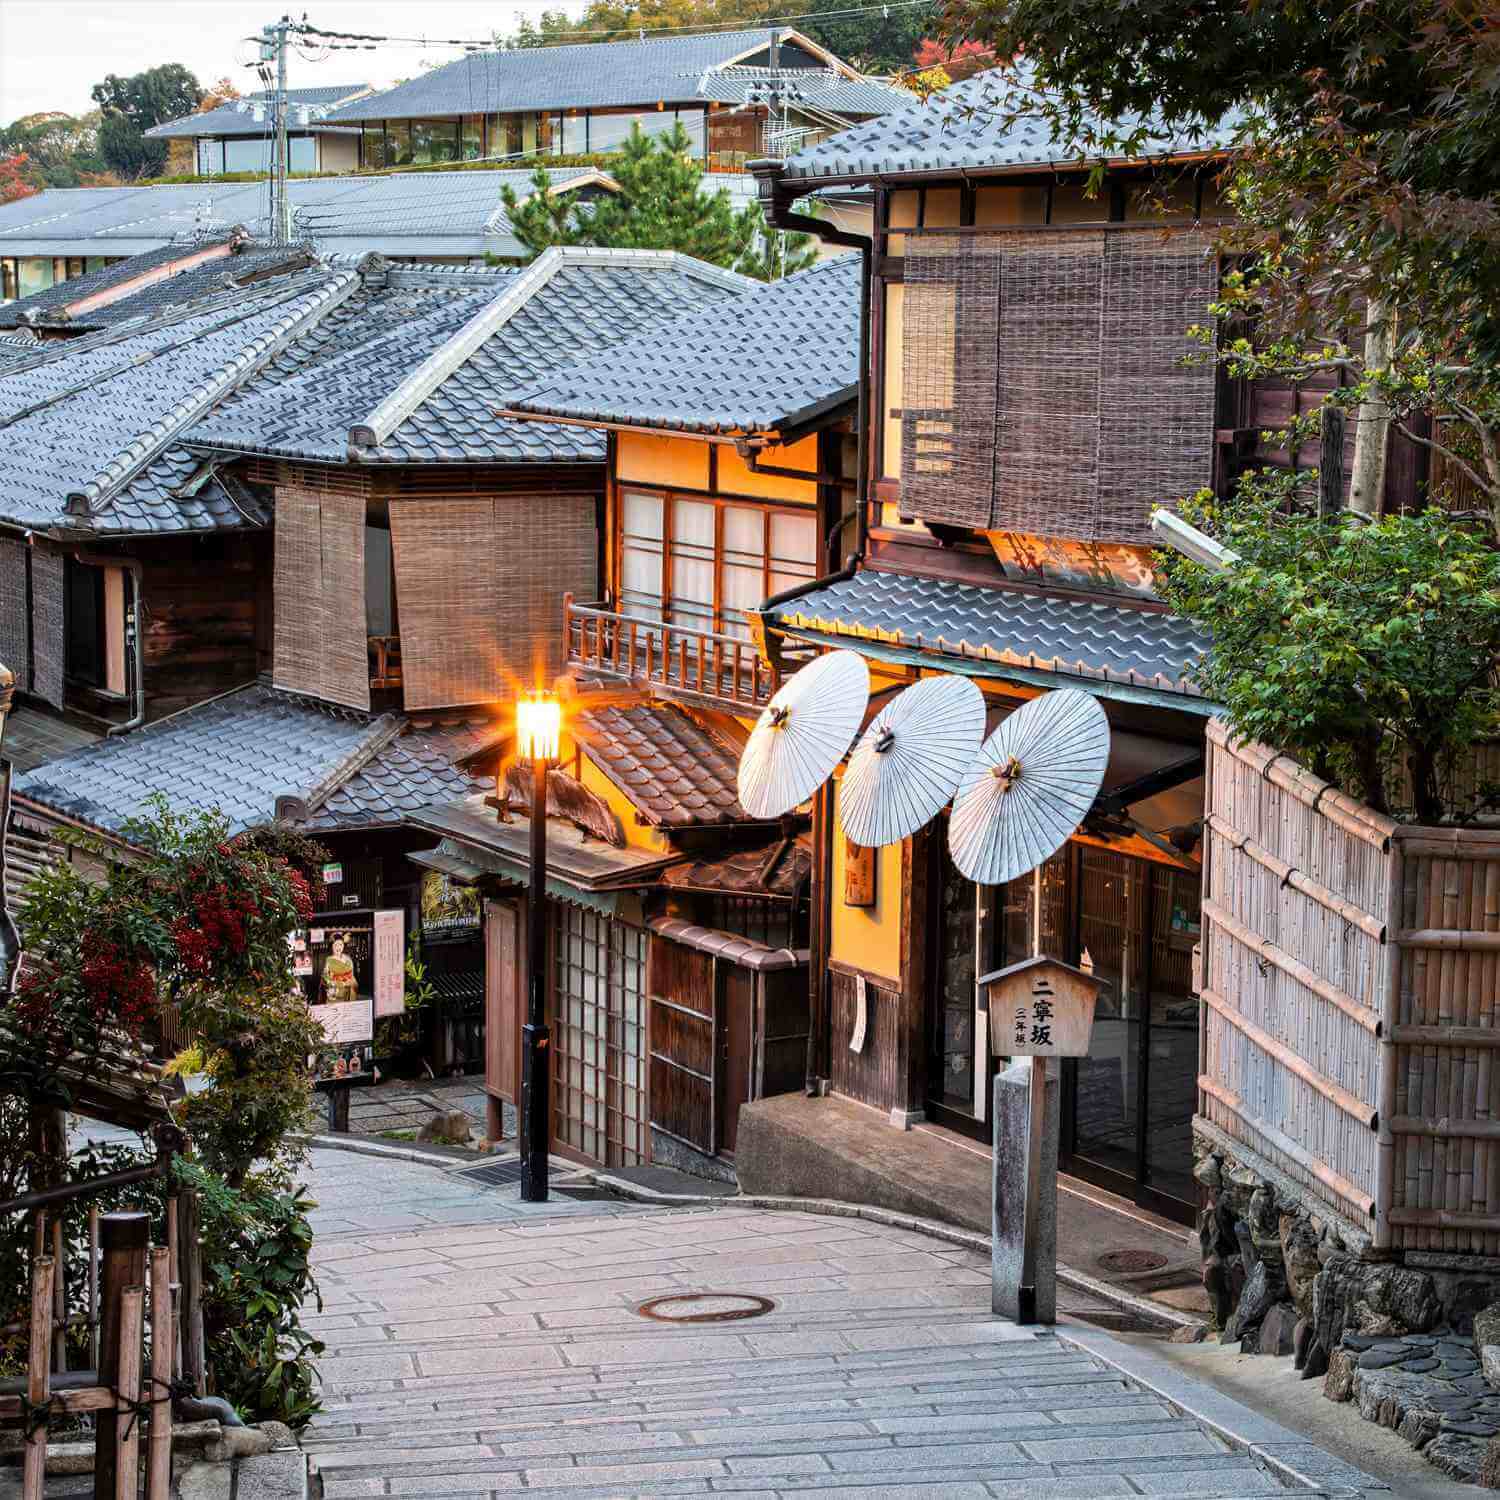 The historic hill roads in Kyoto 3